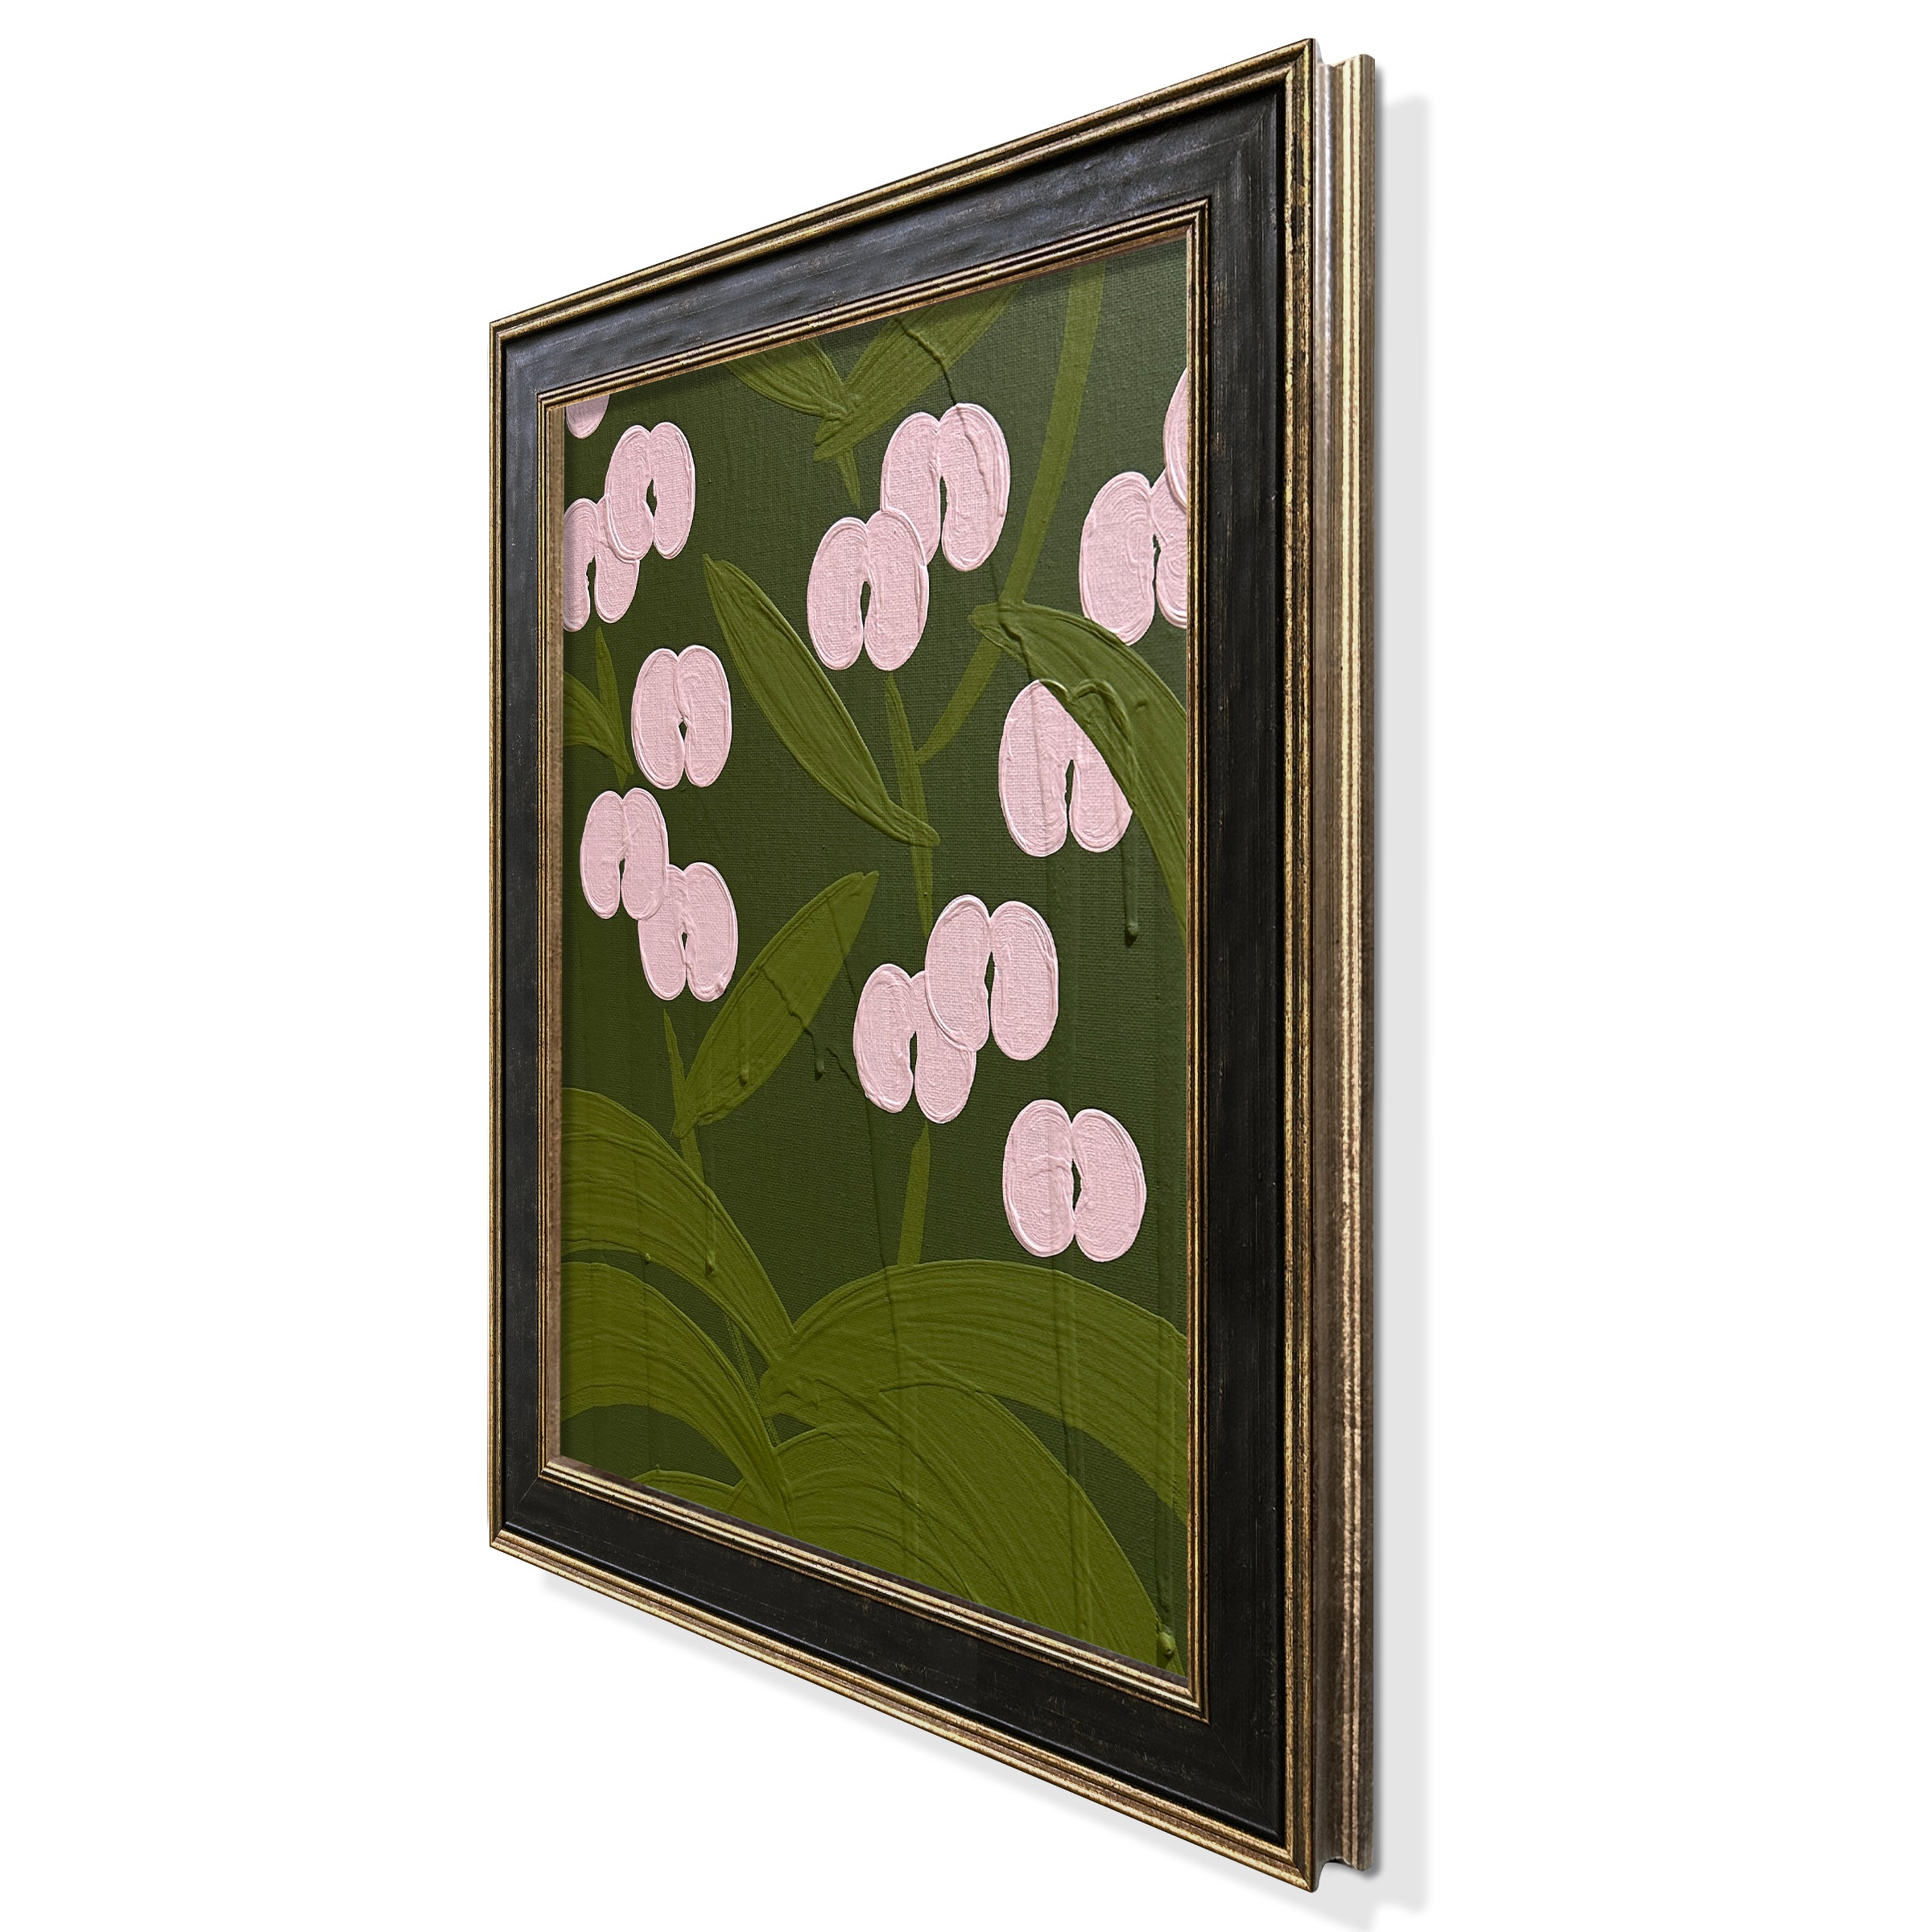 Mini Haichi Orchid Forest/Avocado/Light Pink Acrylic Painting by Ron Giusti